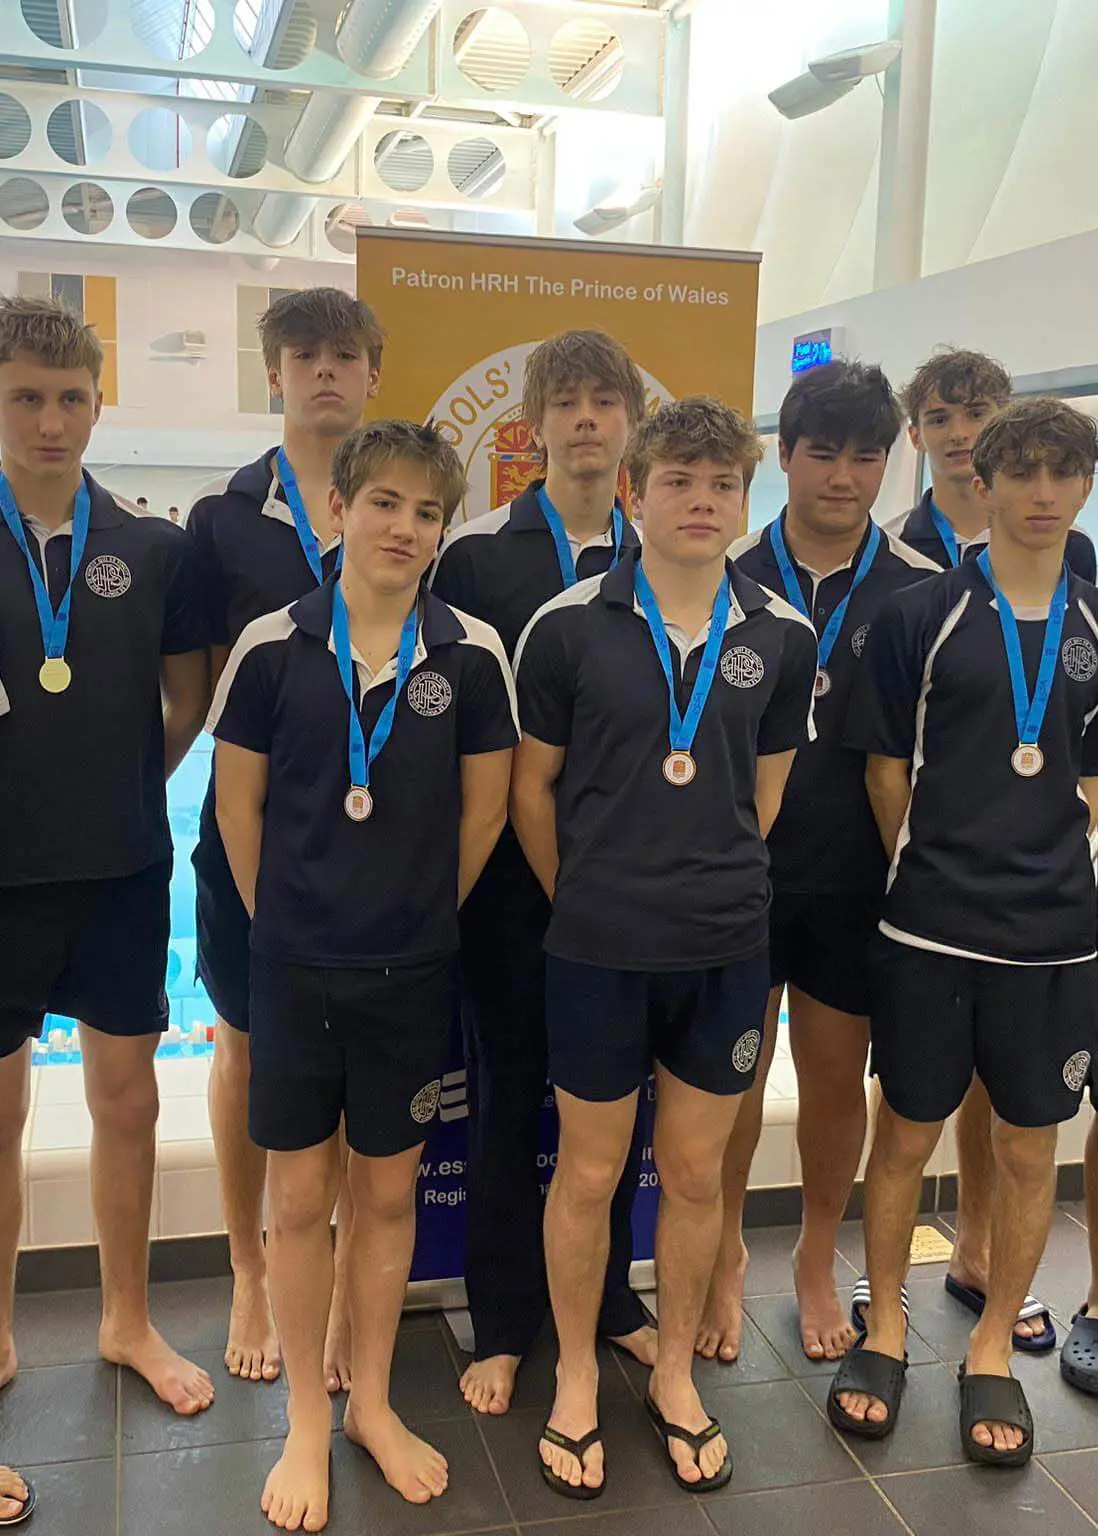 Senior pupils with gold medals for swimming at Ibstock Place School, a private school near Richmond, Barnes, Putney, Kingston, and Wandsworth.